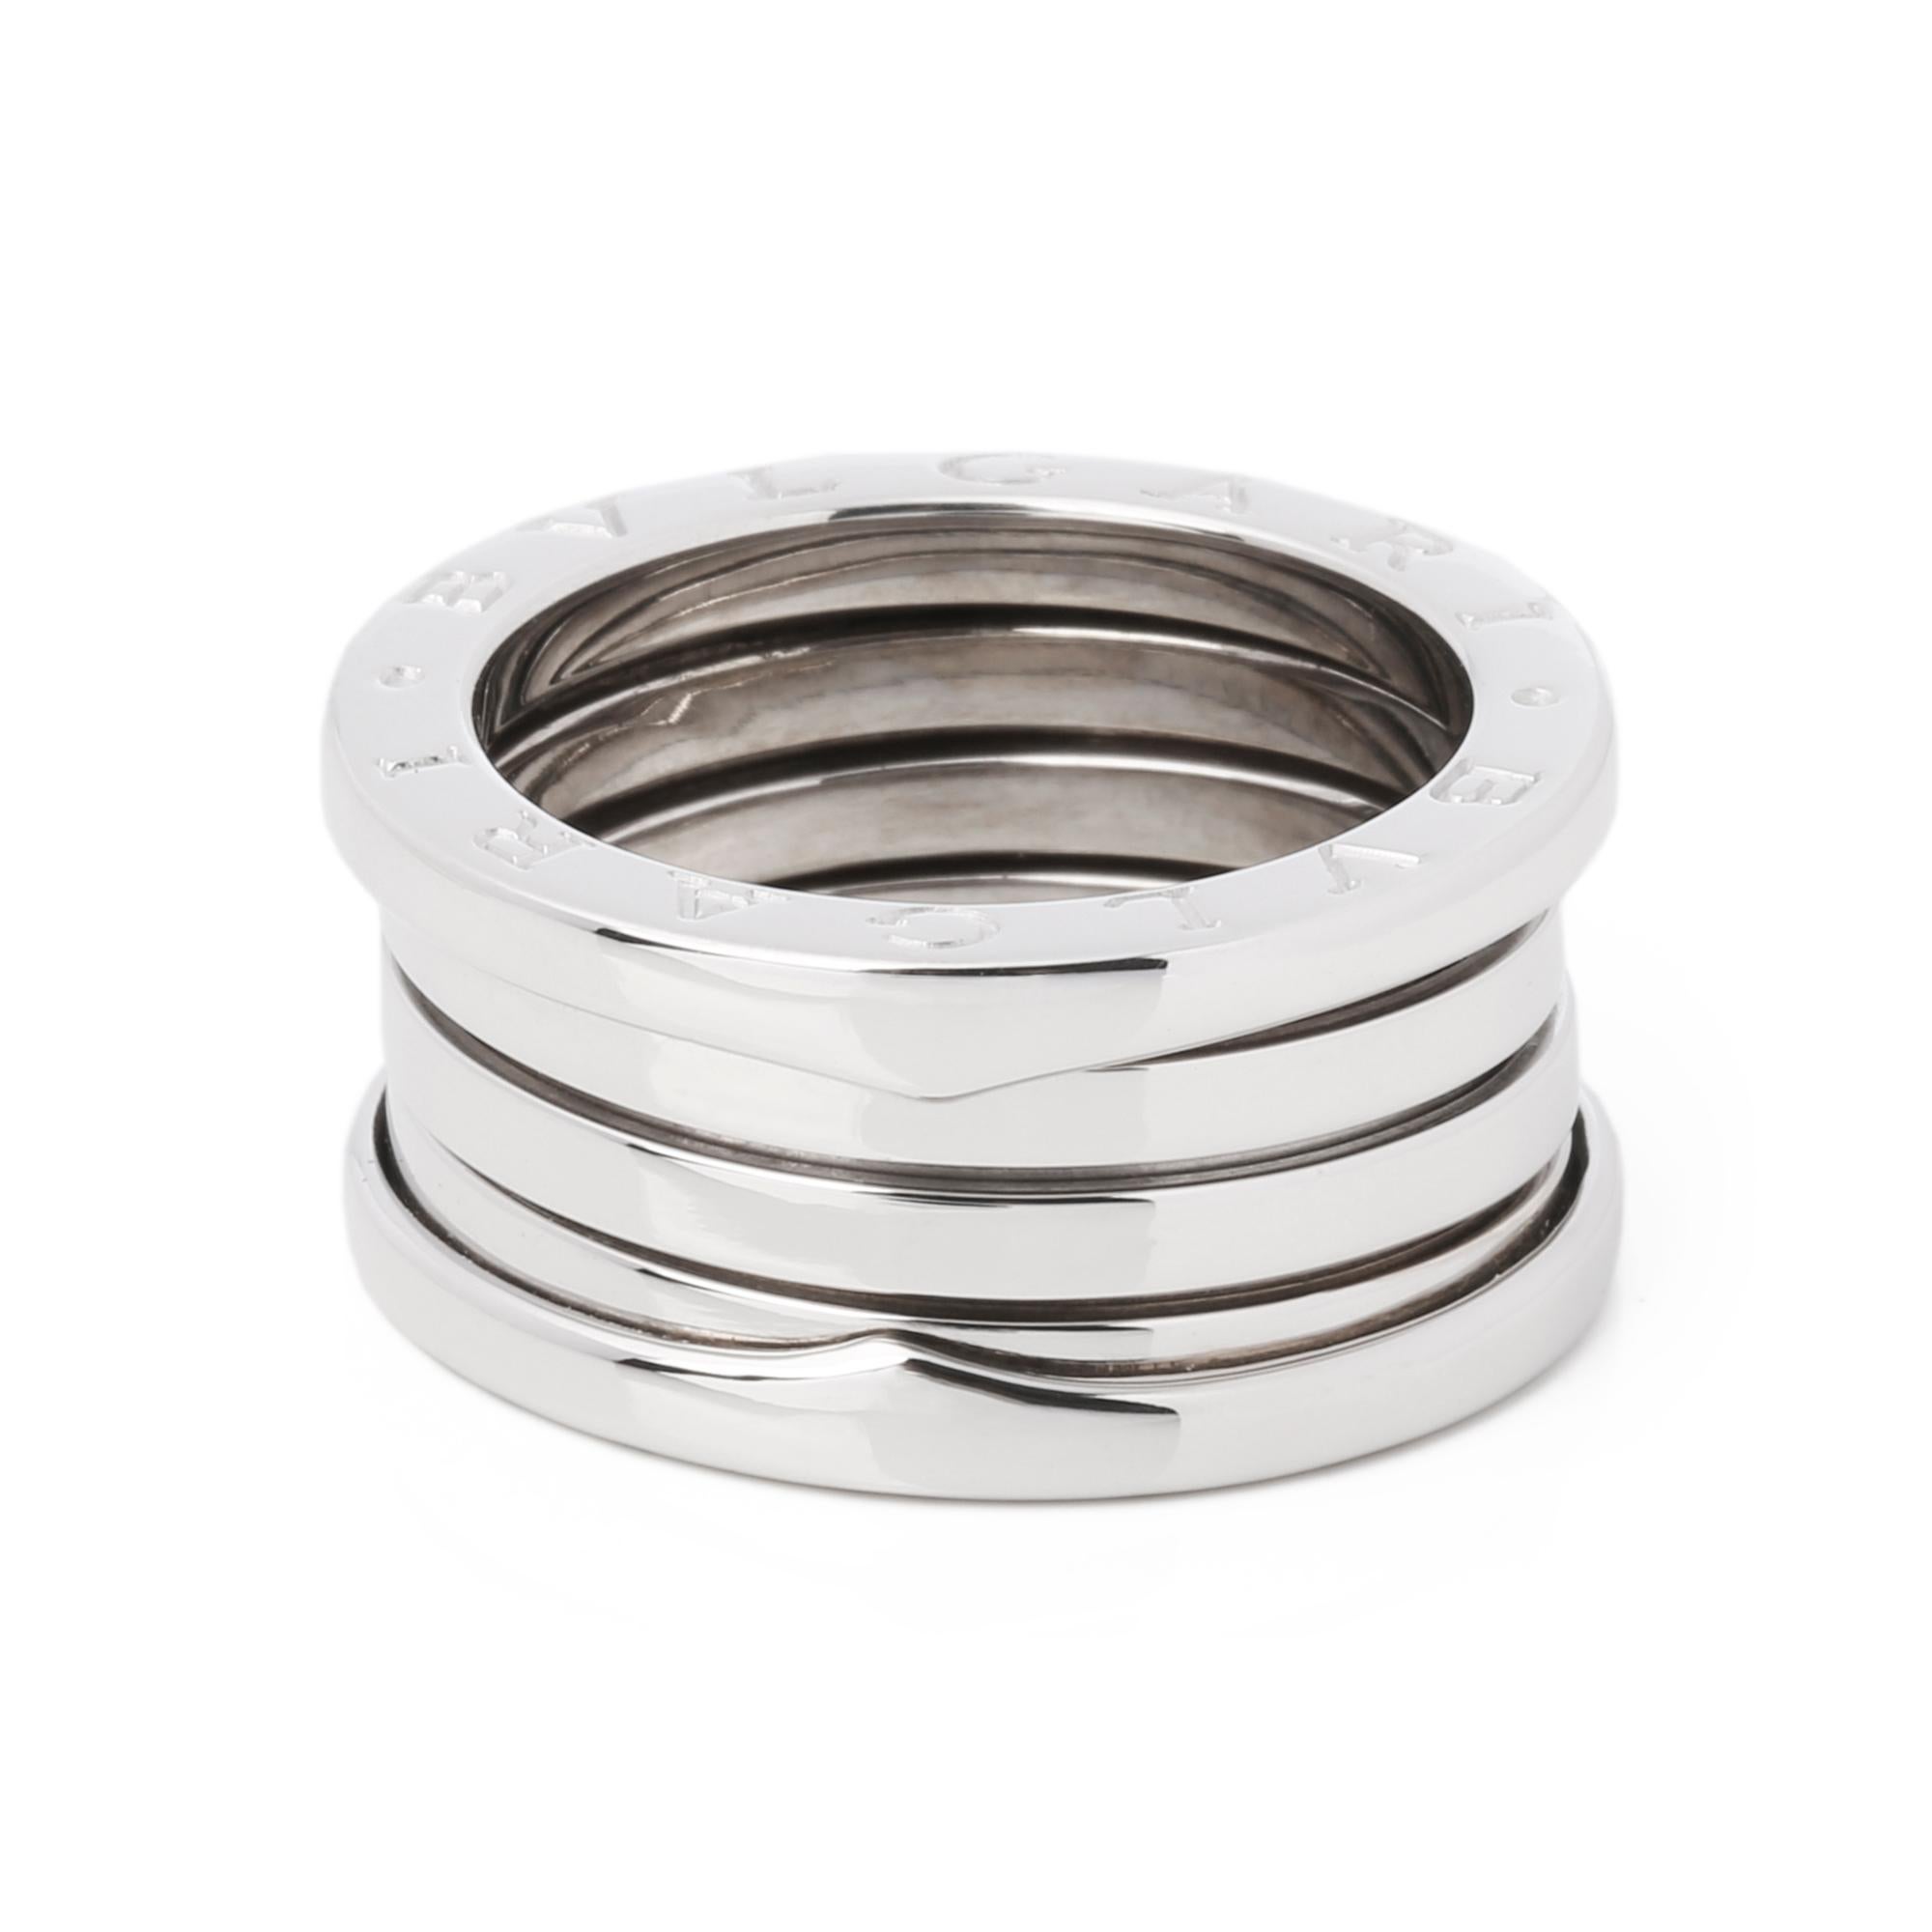 This ring by Bulgari is from their B Zero 1 collection and features a distinctive three band spiral design in 18ct white gold. Complete with a Xupes presentation box. Our Xupes reference is J699  should you need to quote this.